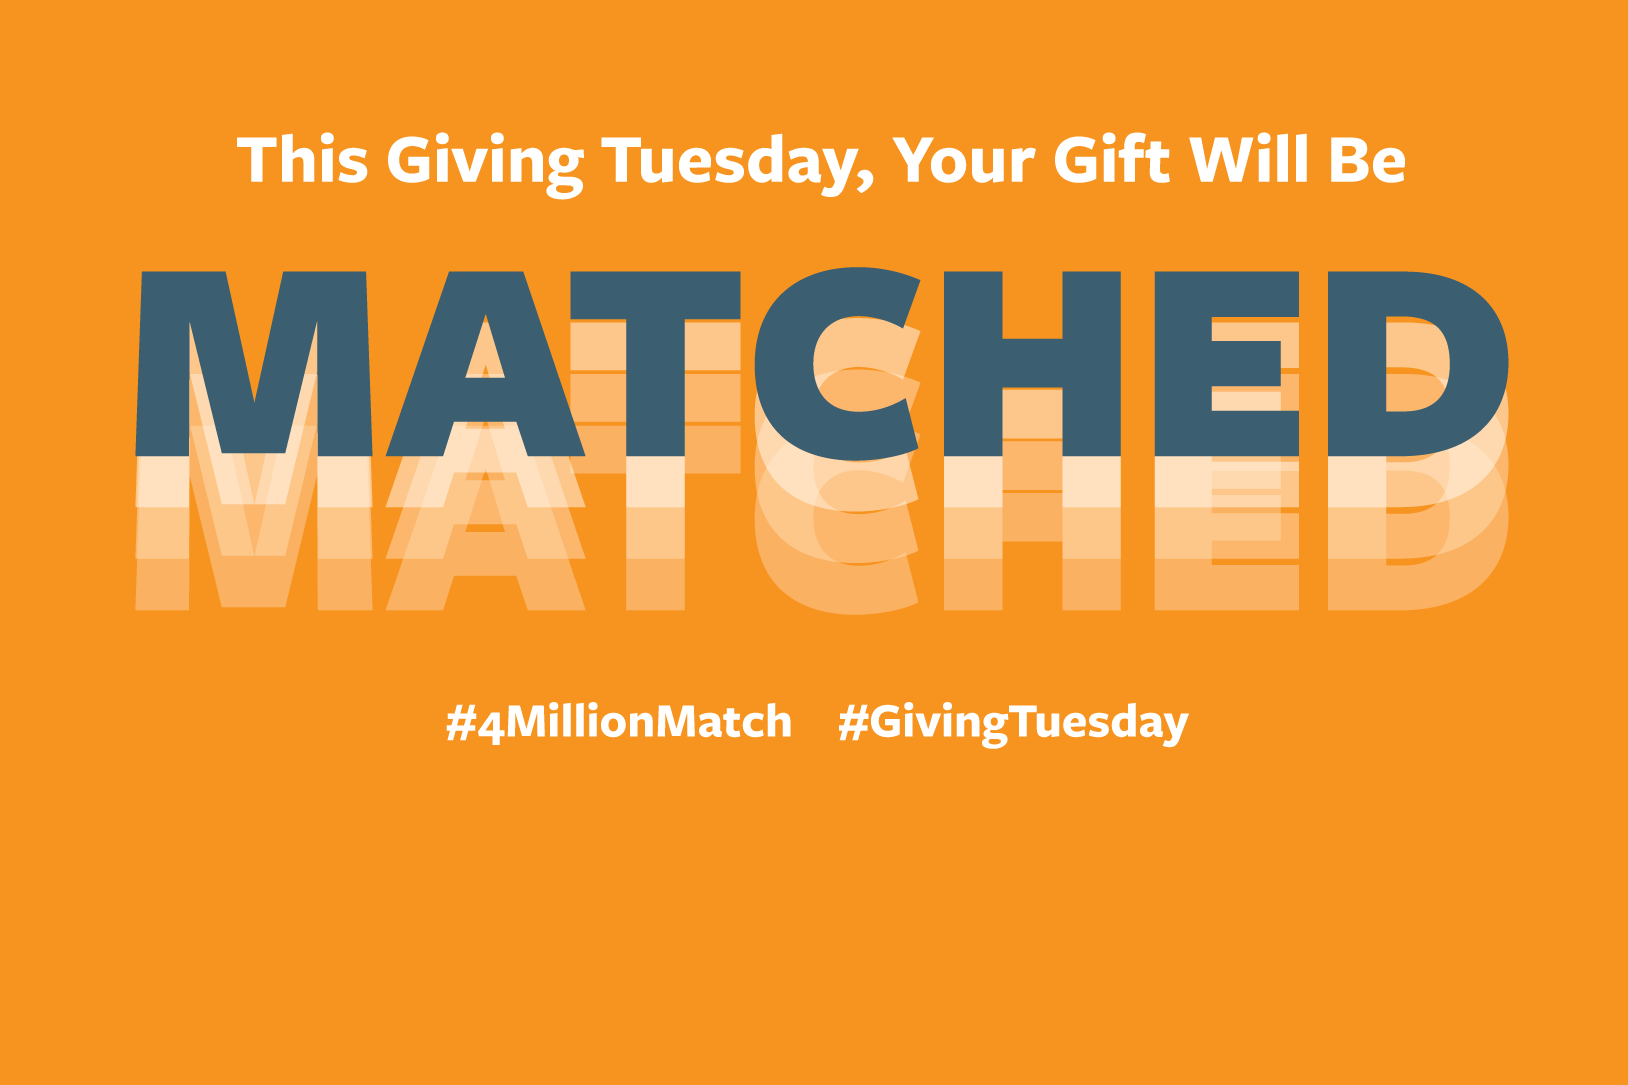 This Giving Tuesday, your gift will be matched.